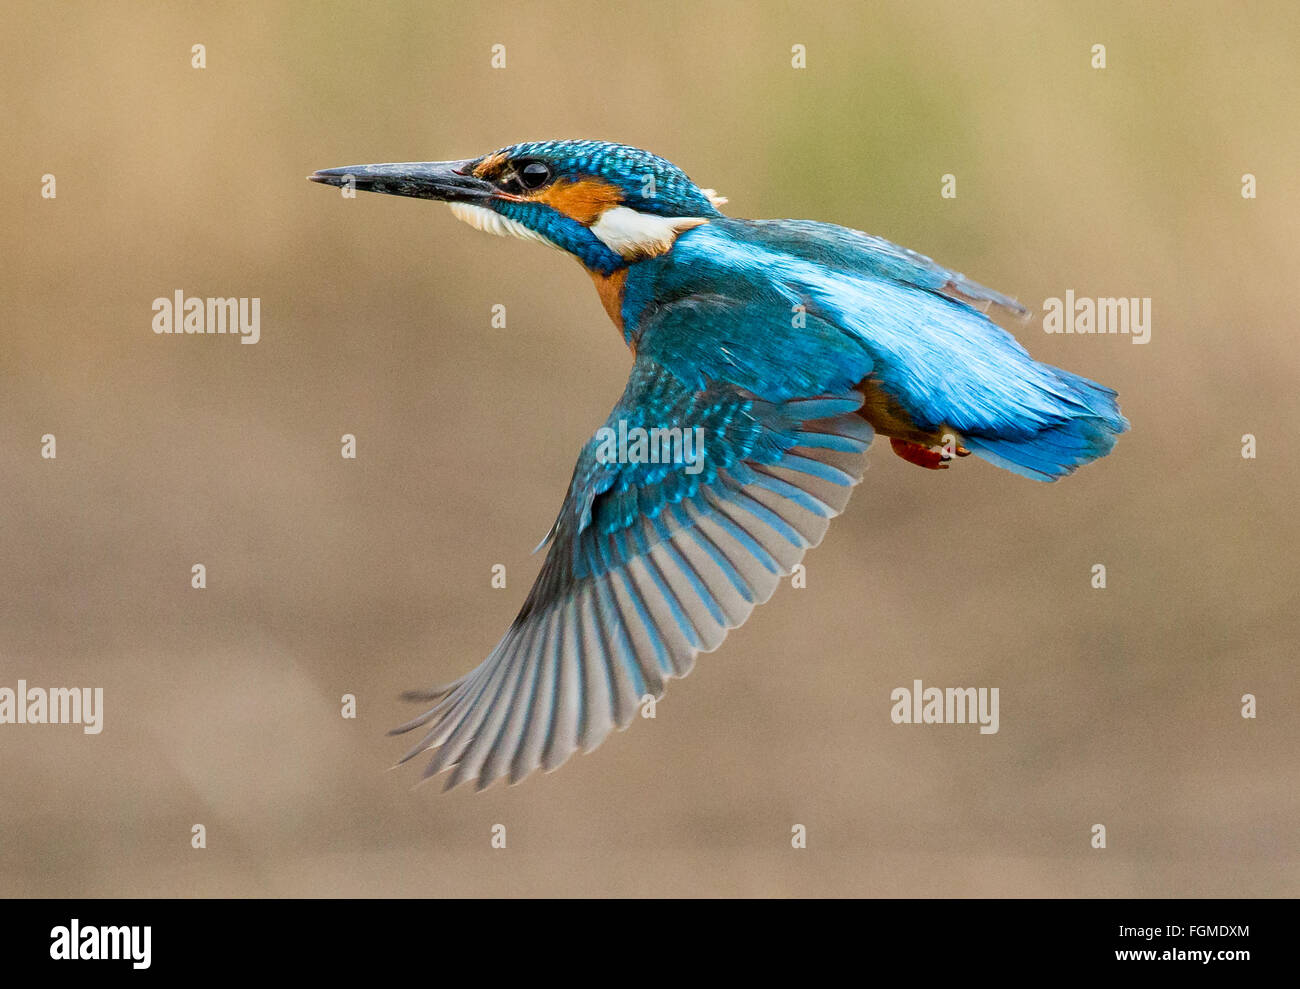 Flying Kingfisher Banque D'Images